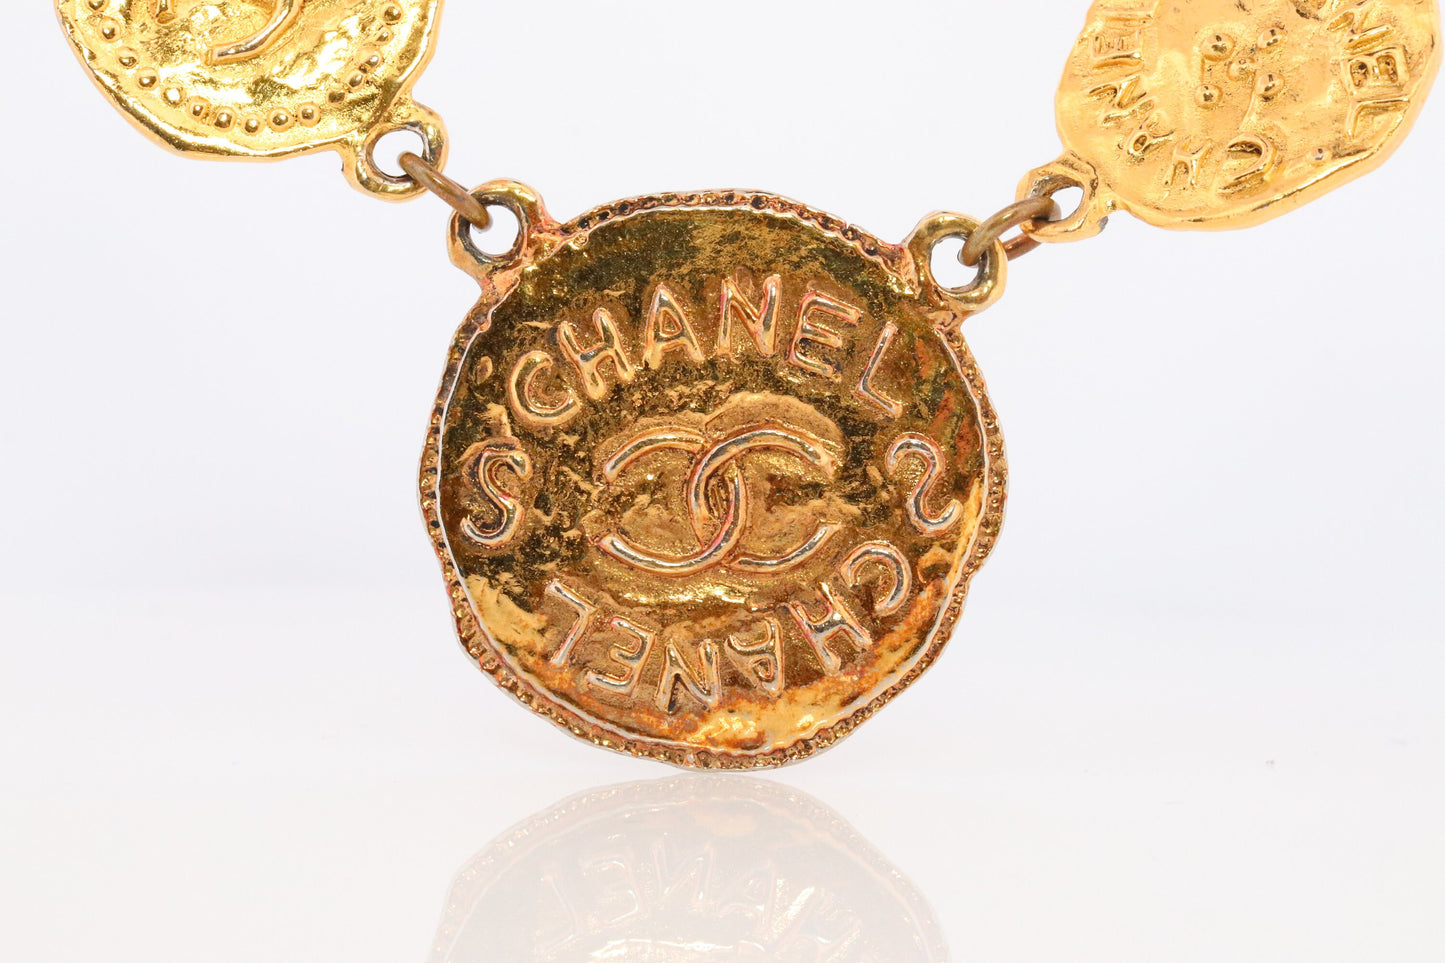 Chanel Necklace. Genuine CC CHANEL Round LOGO Coin Necklace. Disc Chain Necklace. byzantine Etruscan Hammered Coco Chanel Chain Necklace